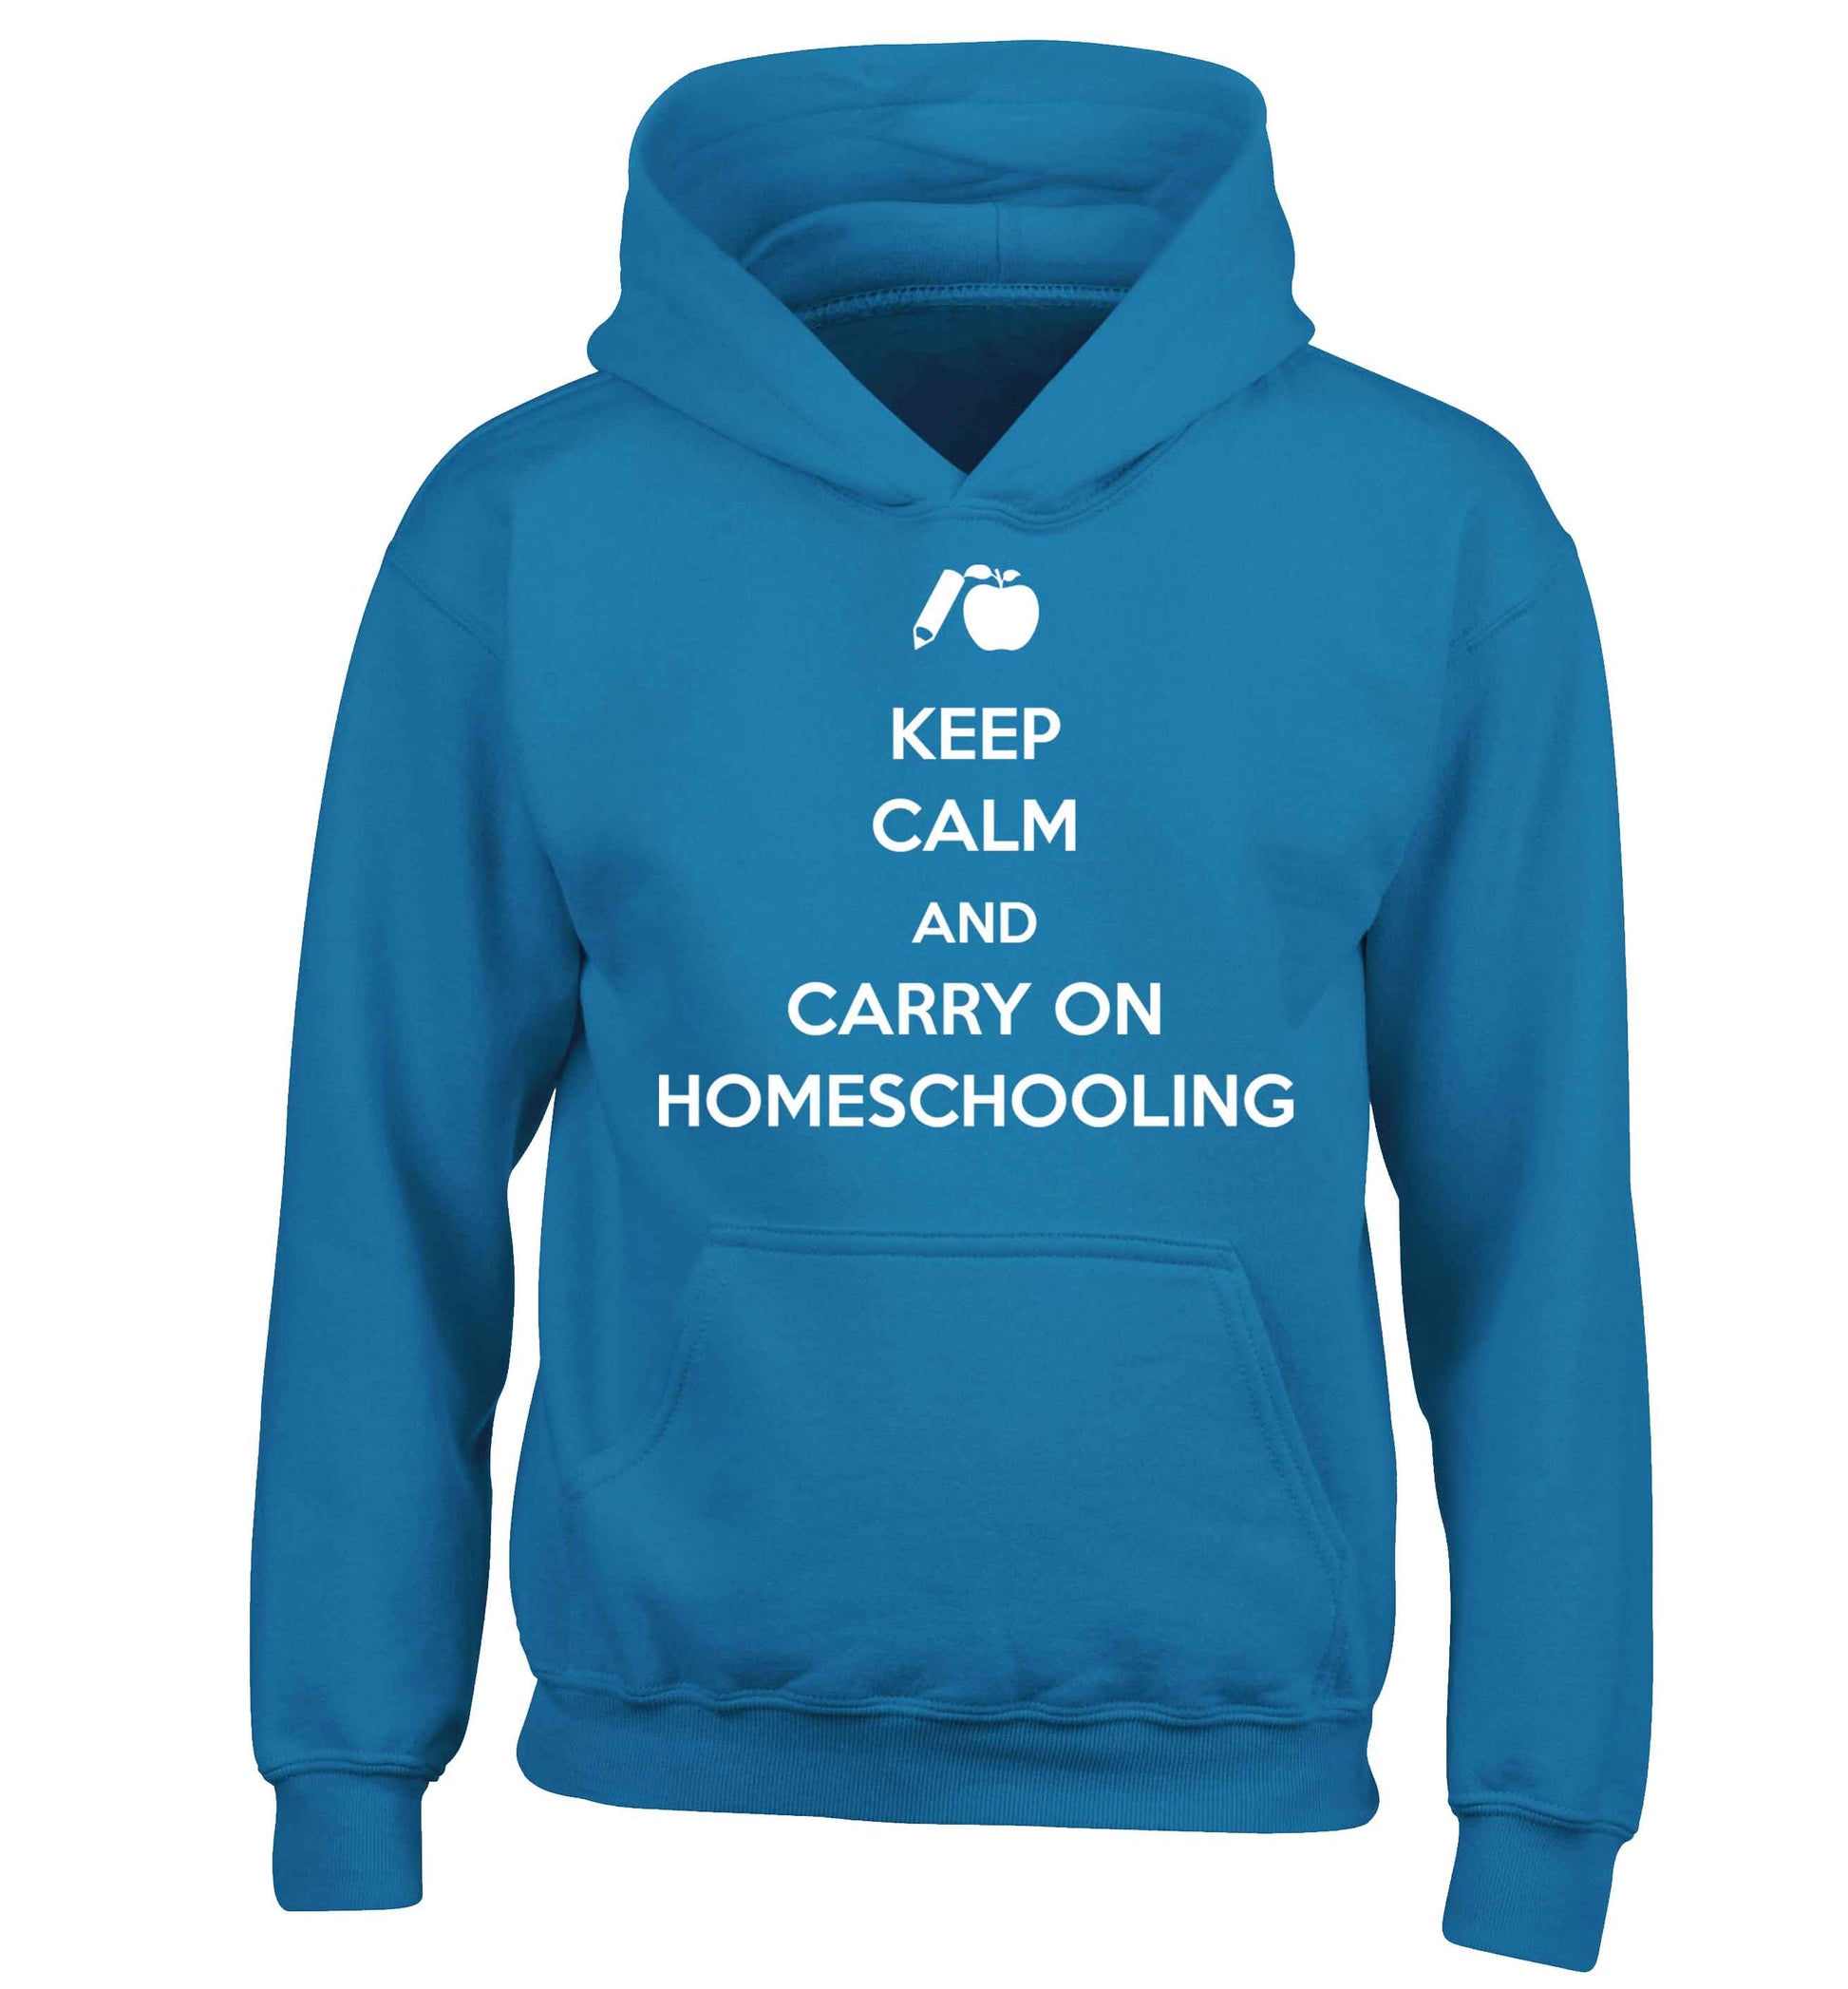 Keep calm and carry on homeschooling children's blue hoodie 12-13 Years